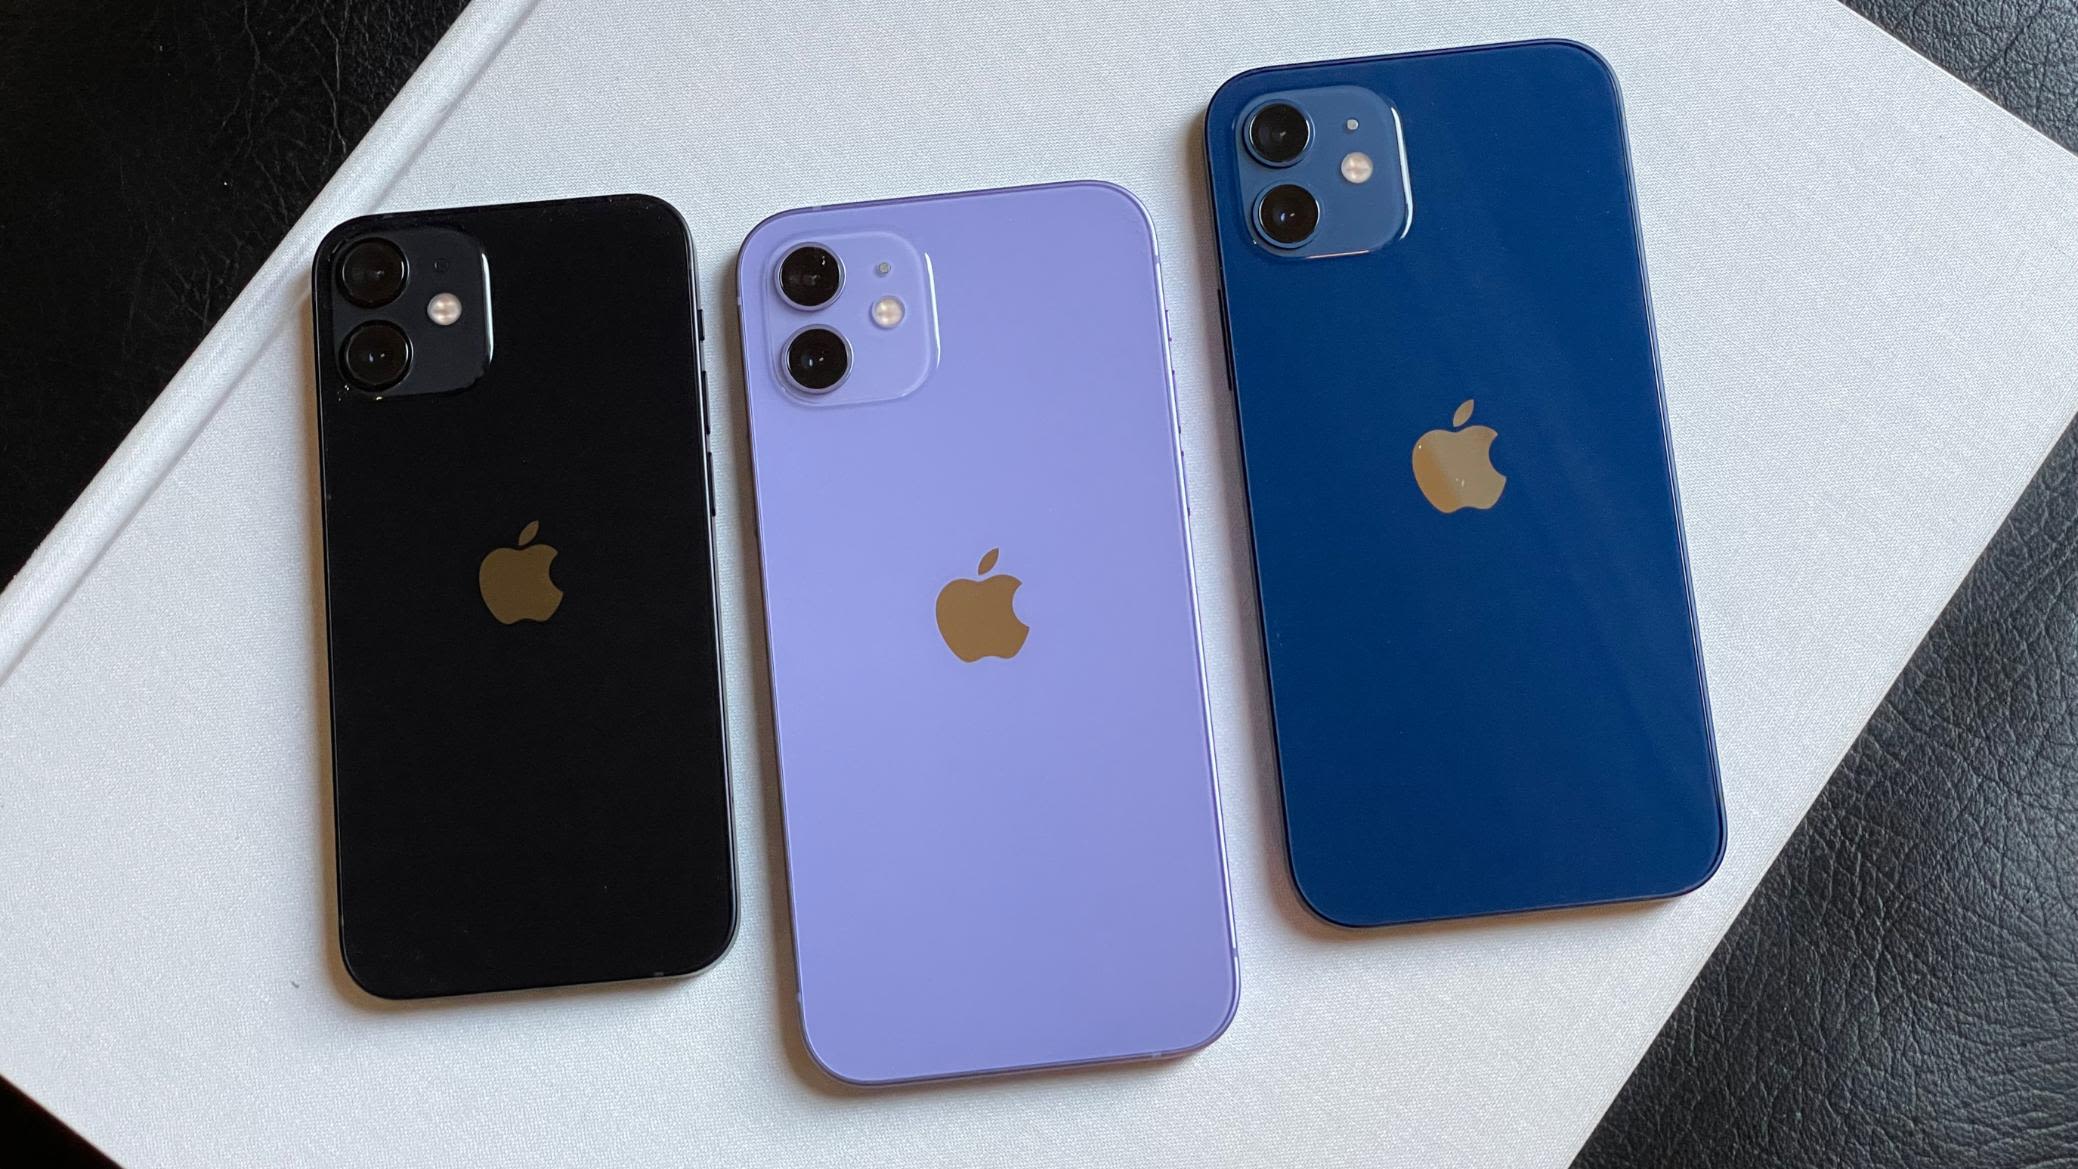 IPhone 11 Vs IPhone 12 Vs IPhone 13 Which One To Buy? vlr.eng.br